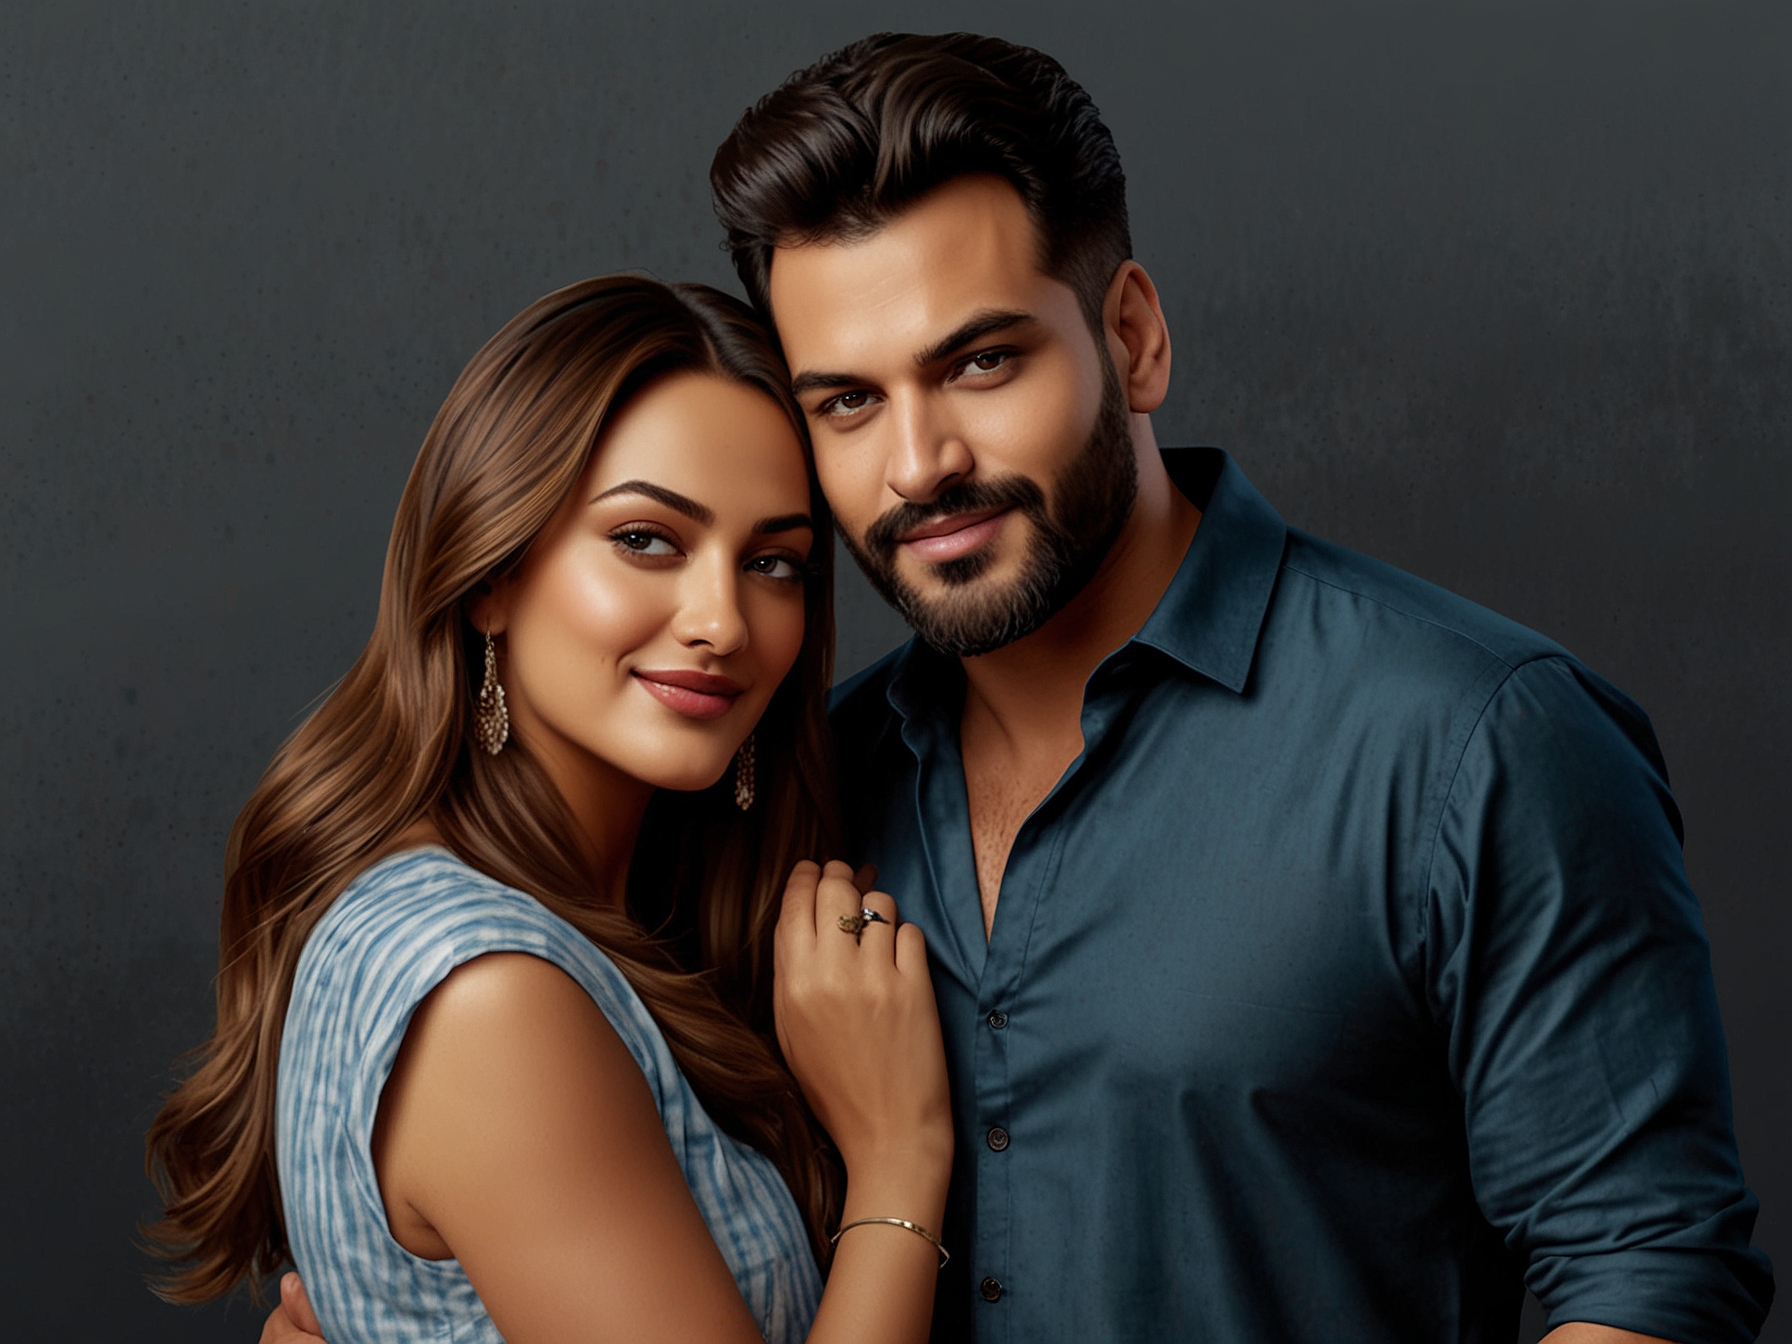 Sonakshi Sinha and Zaheer Iqbal seen together at an event, sharing a moment of closeness, highlighting their relationship's public scrutiny amidst familial and generational tensions.